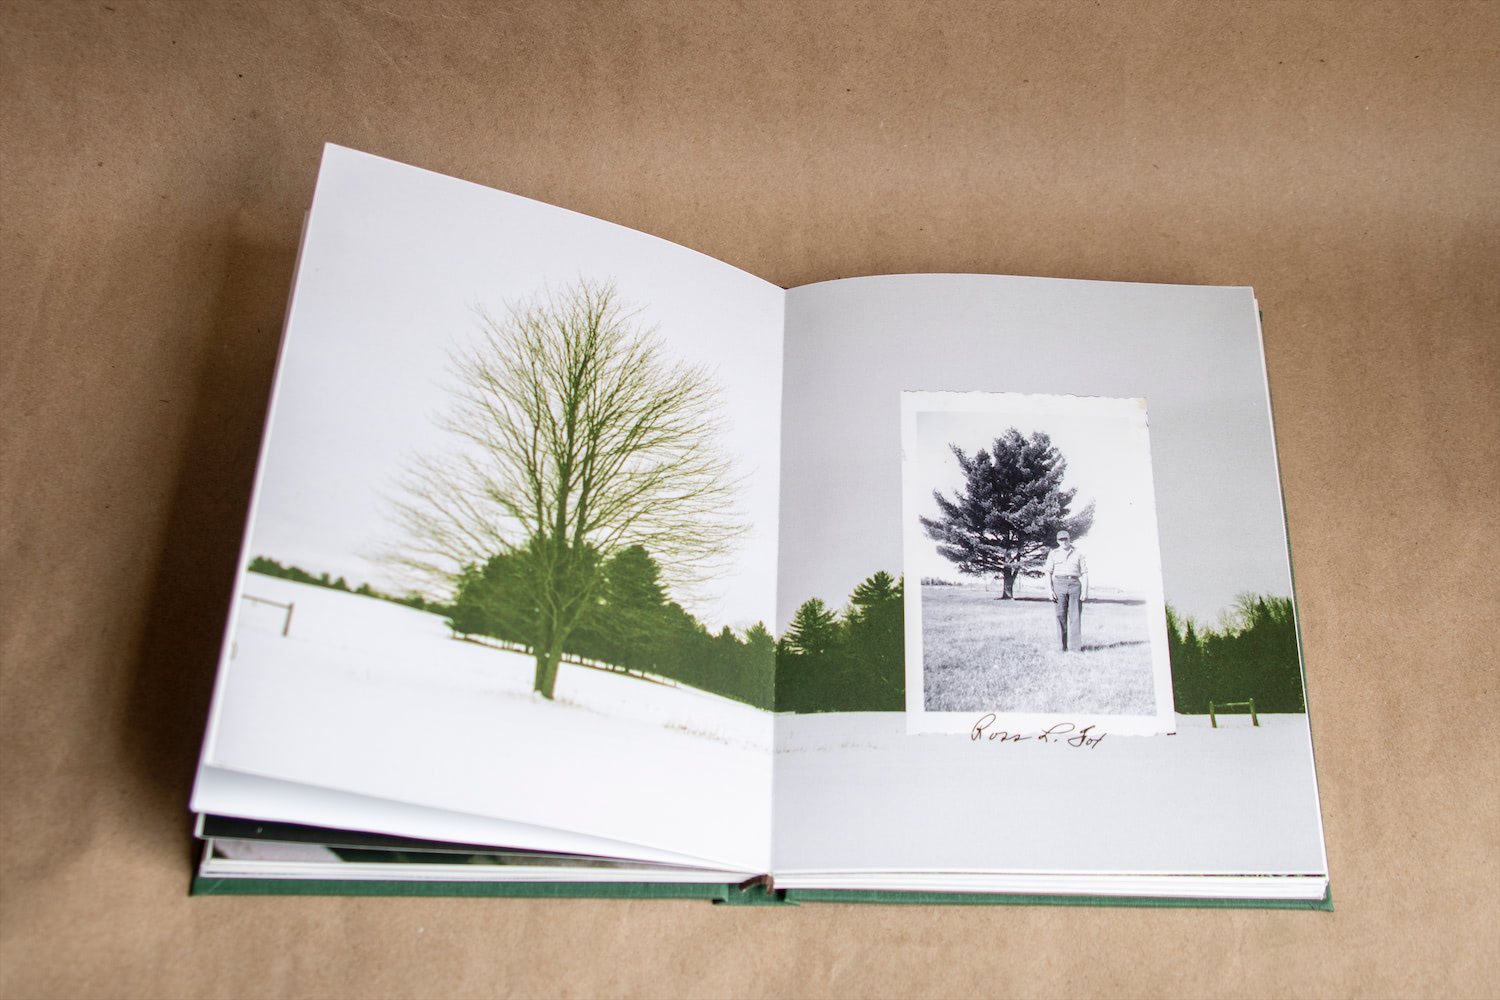 An opened spread of a book showing a photograph of an open field and tree in the background and an old film photograph on the same field on top with handwriting below it.